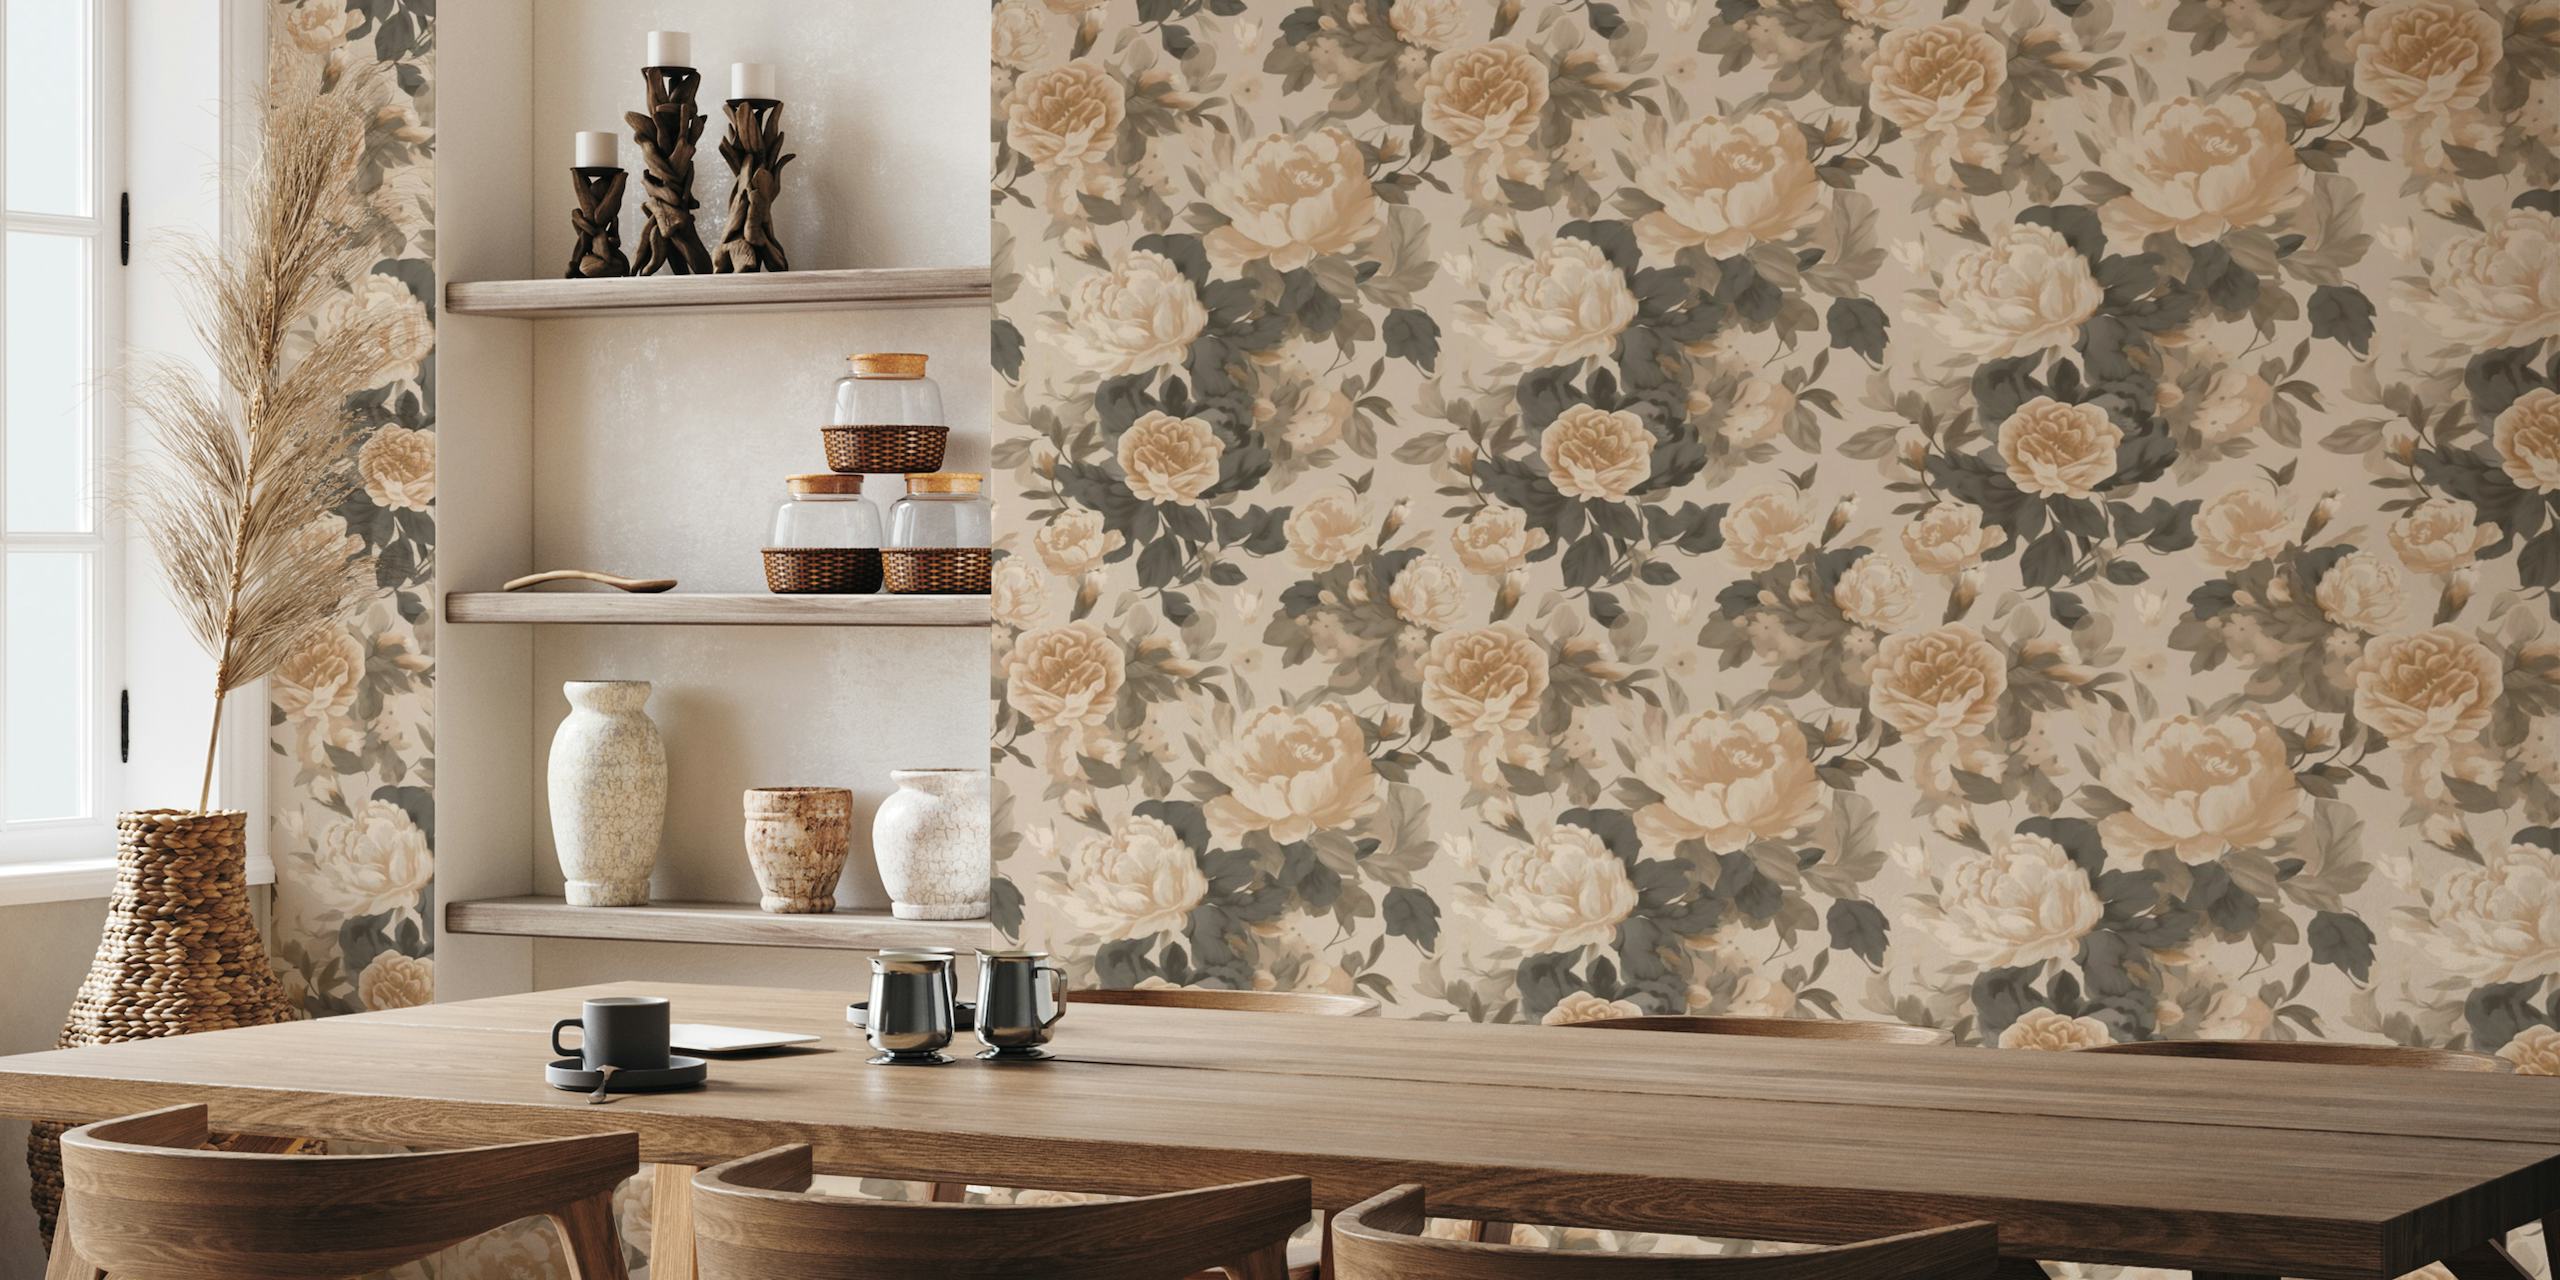 Baroque Roses Floral Nostalgia Design In Moody Ivory Beige tapete